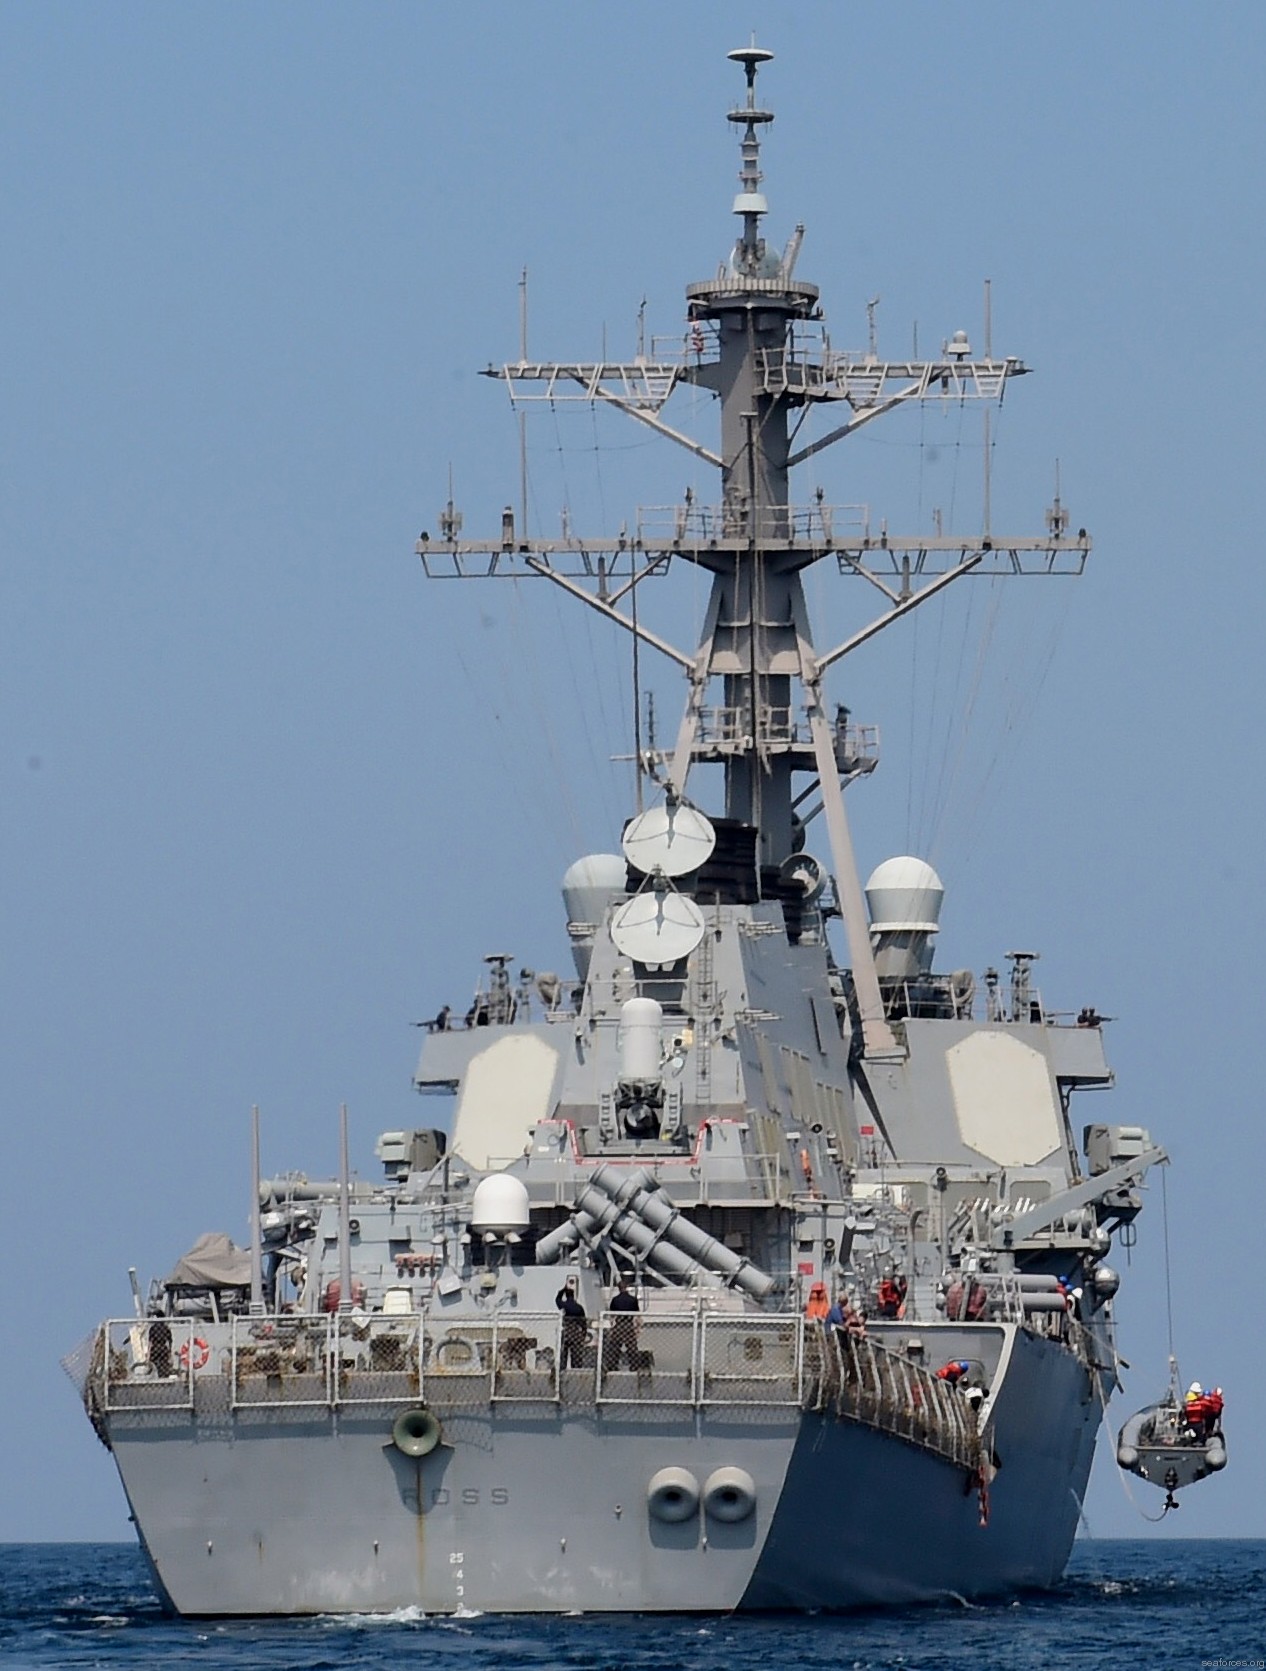 ddg-71 uss ross guided missile destroyer arleigh burke class aegis bmd 41 black sea